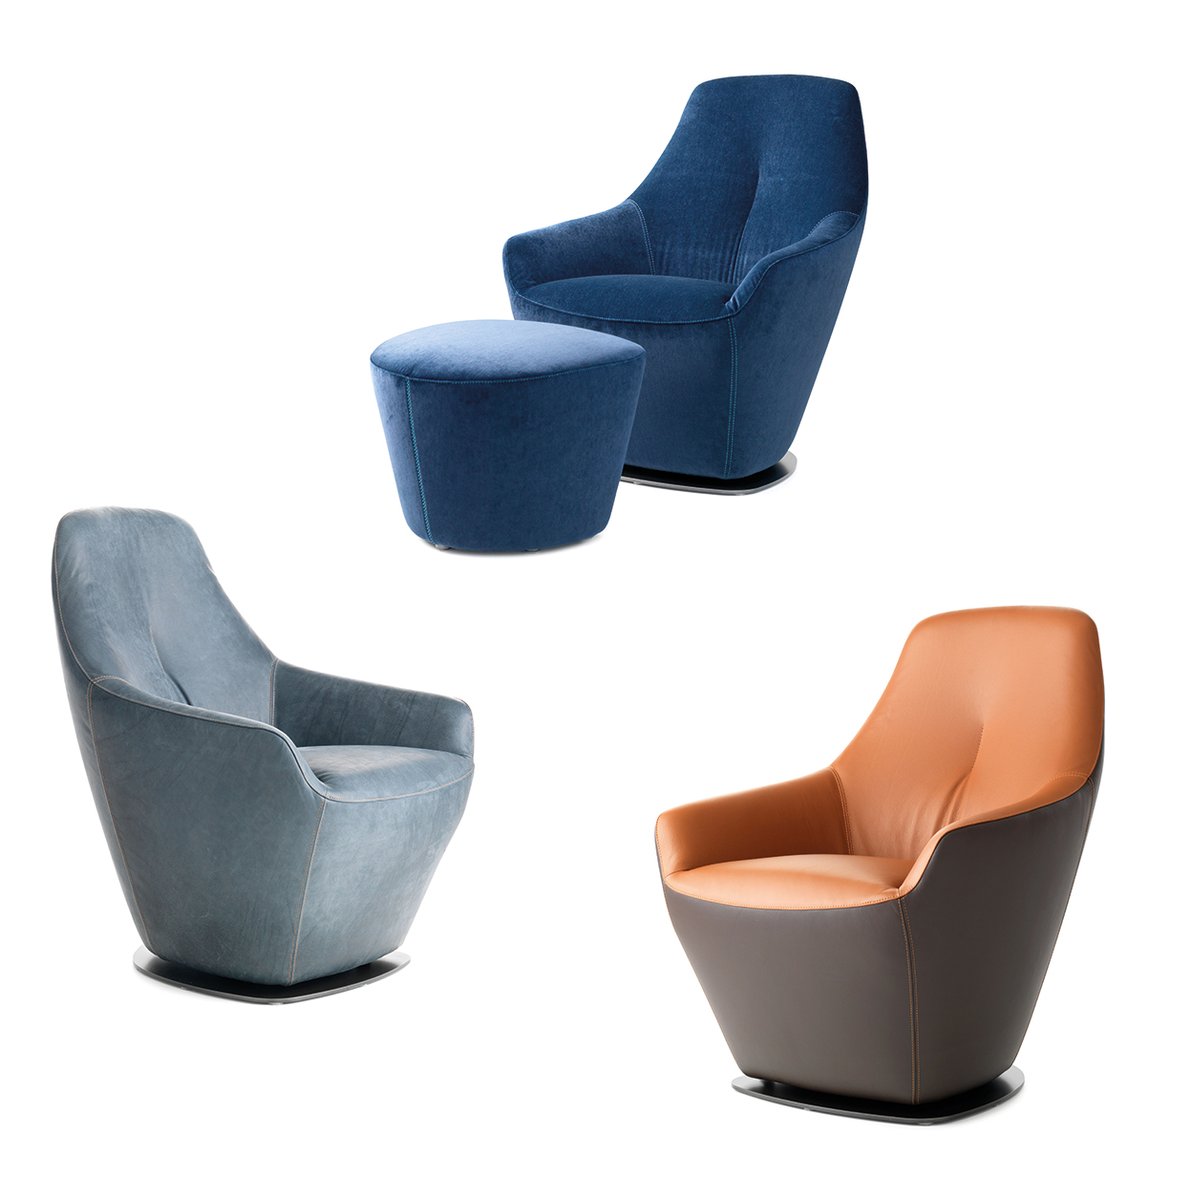 Kust Onbekwaamheid boycot Theodores Furniture on Twitter: "The Cantate swivel chair from #Leolux.  Designed by Frans Schrofer. Visit #Theodores to experience it for yourself!  #ModernFurniture #InteriorDesign #DesignDC https://t.co/bsDcj2qOL2" /  Twitter